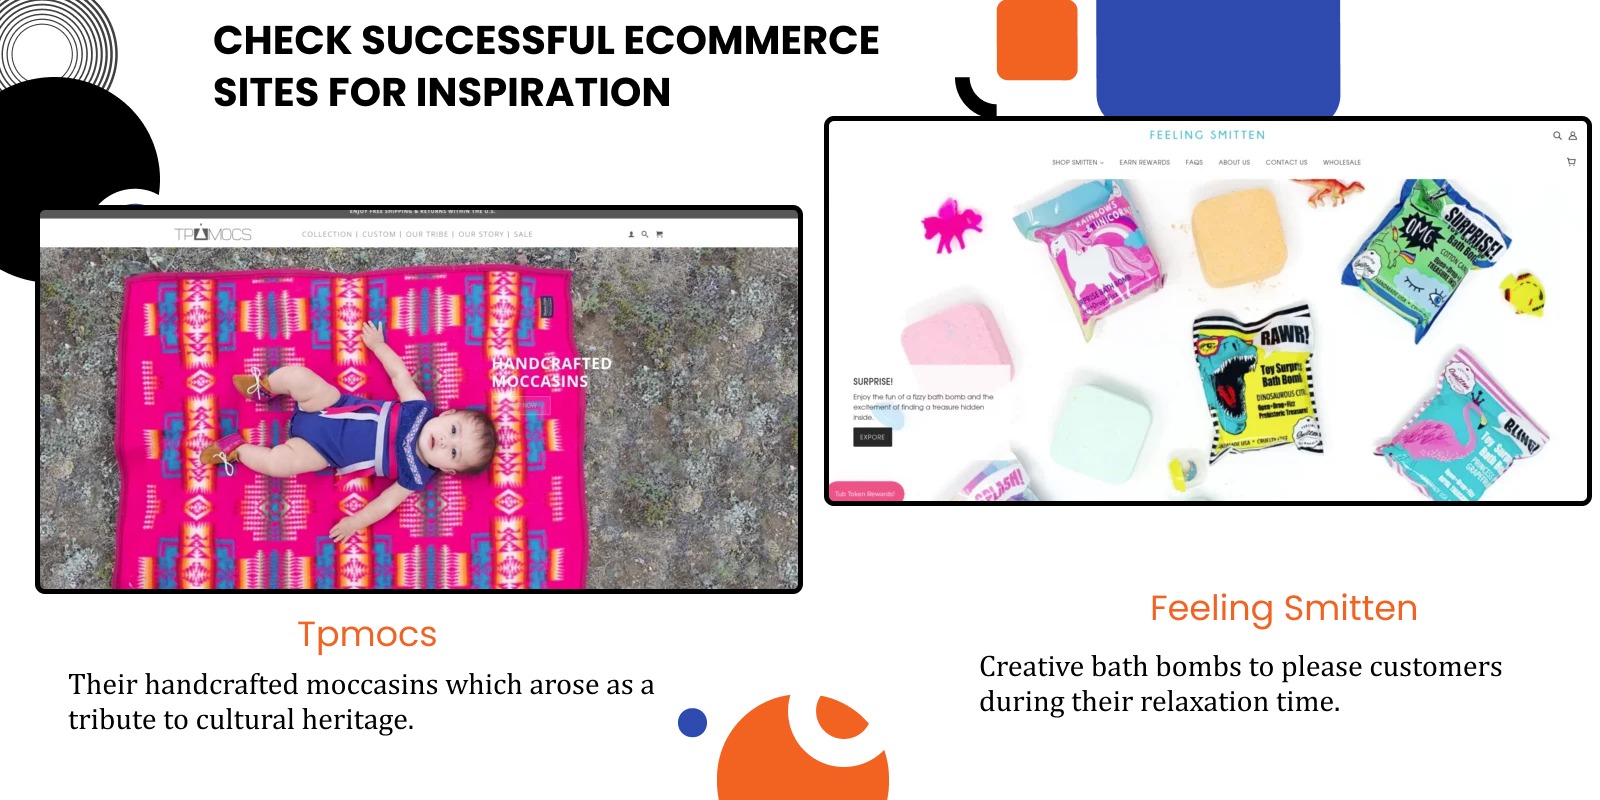 Products to Sell and Successful eCommerce Sites for Inspiration